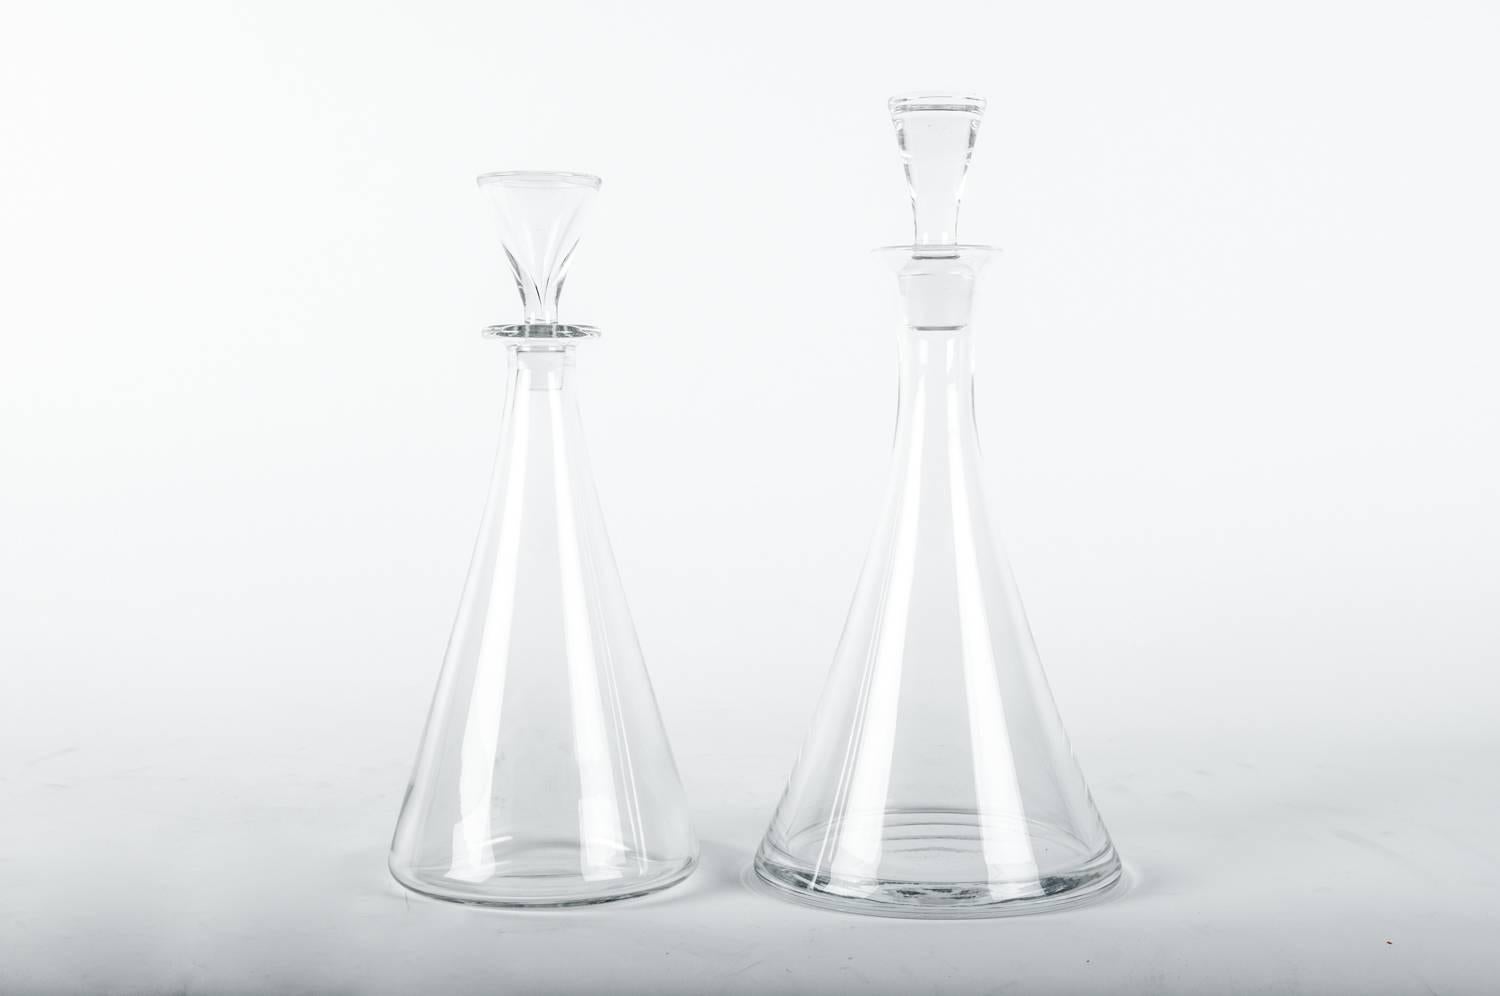 Mid- Century pair of baccarat crystal decanter set. Very Art Deco style with clean line. Just beautiful. Excellent condition. Tall decanter measure 13 inches high x 6.5 inches bottom diameter. The shorter one measure 12 inches high x 5.5 inches